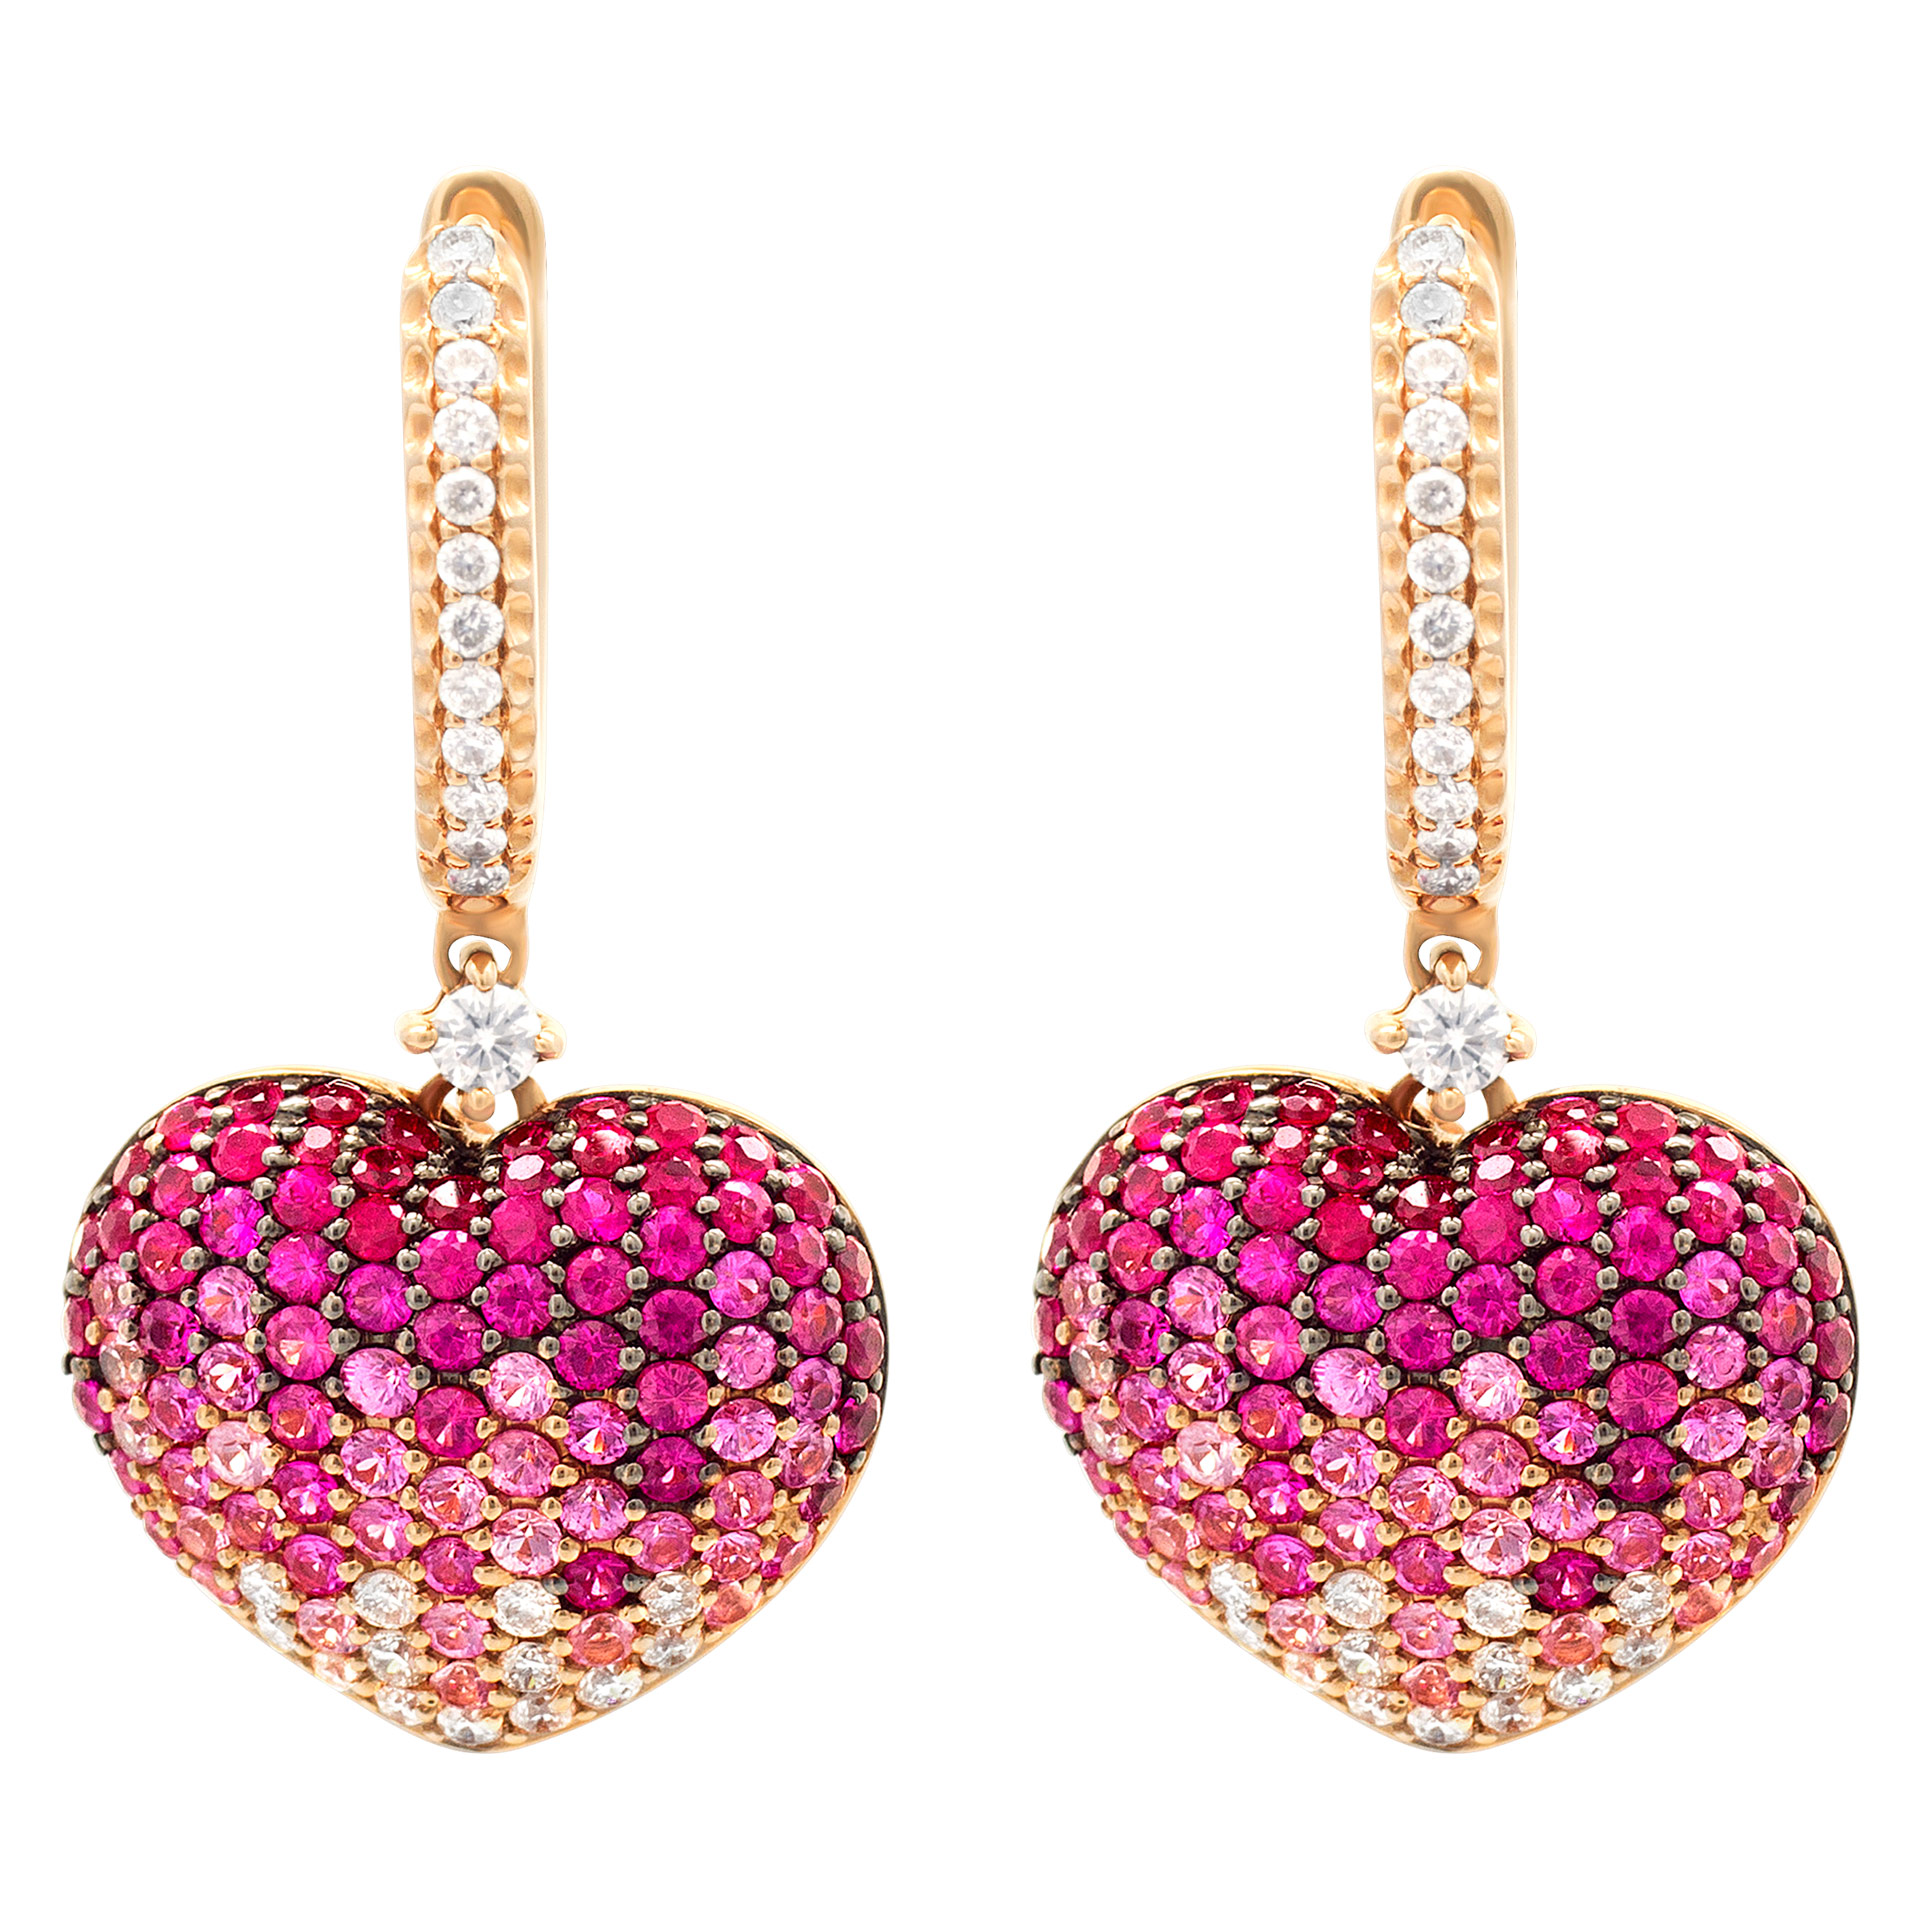 Heart Shaped ruby, pink sapphire and diamond earrings in 18k rose gold